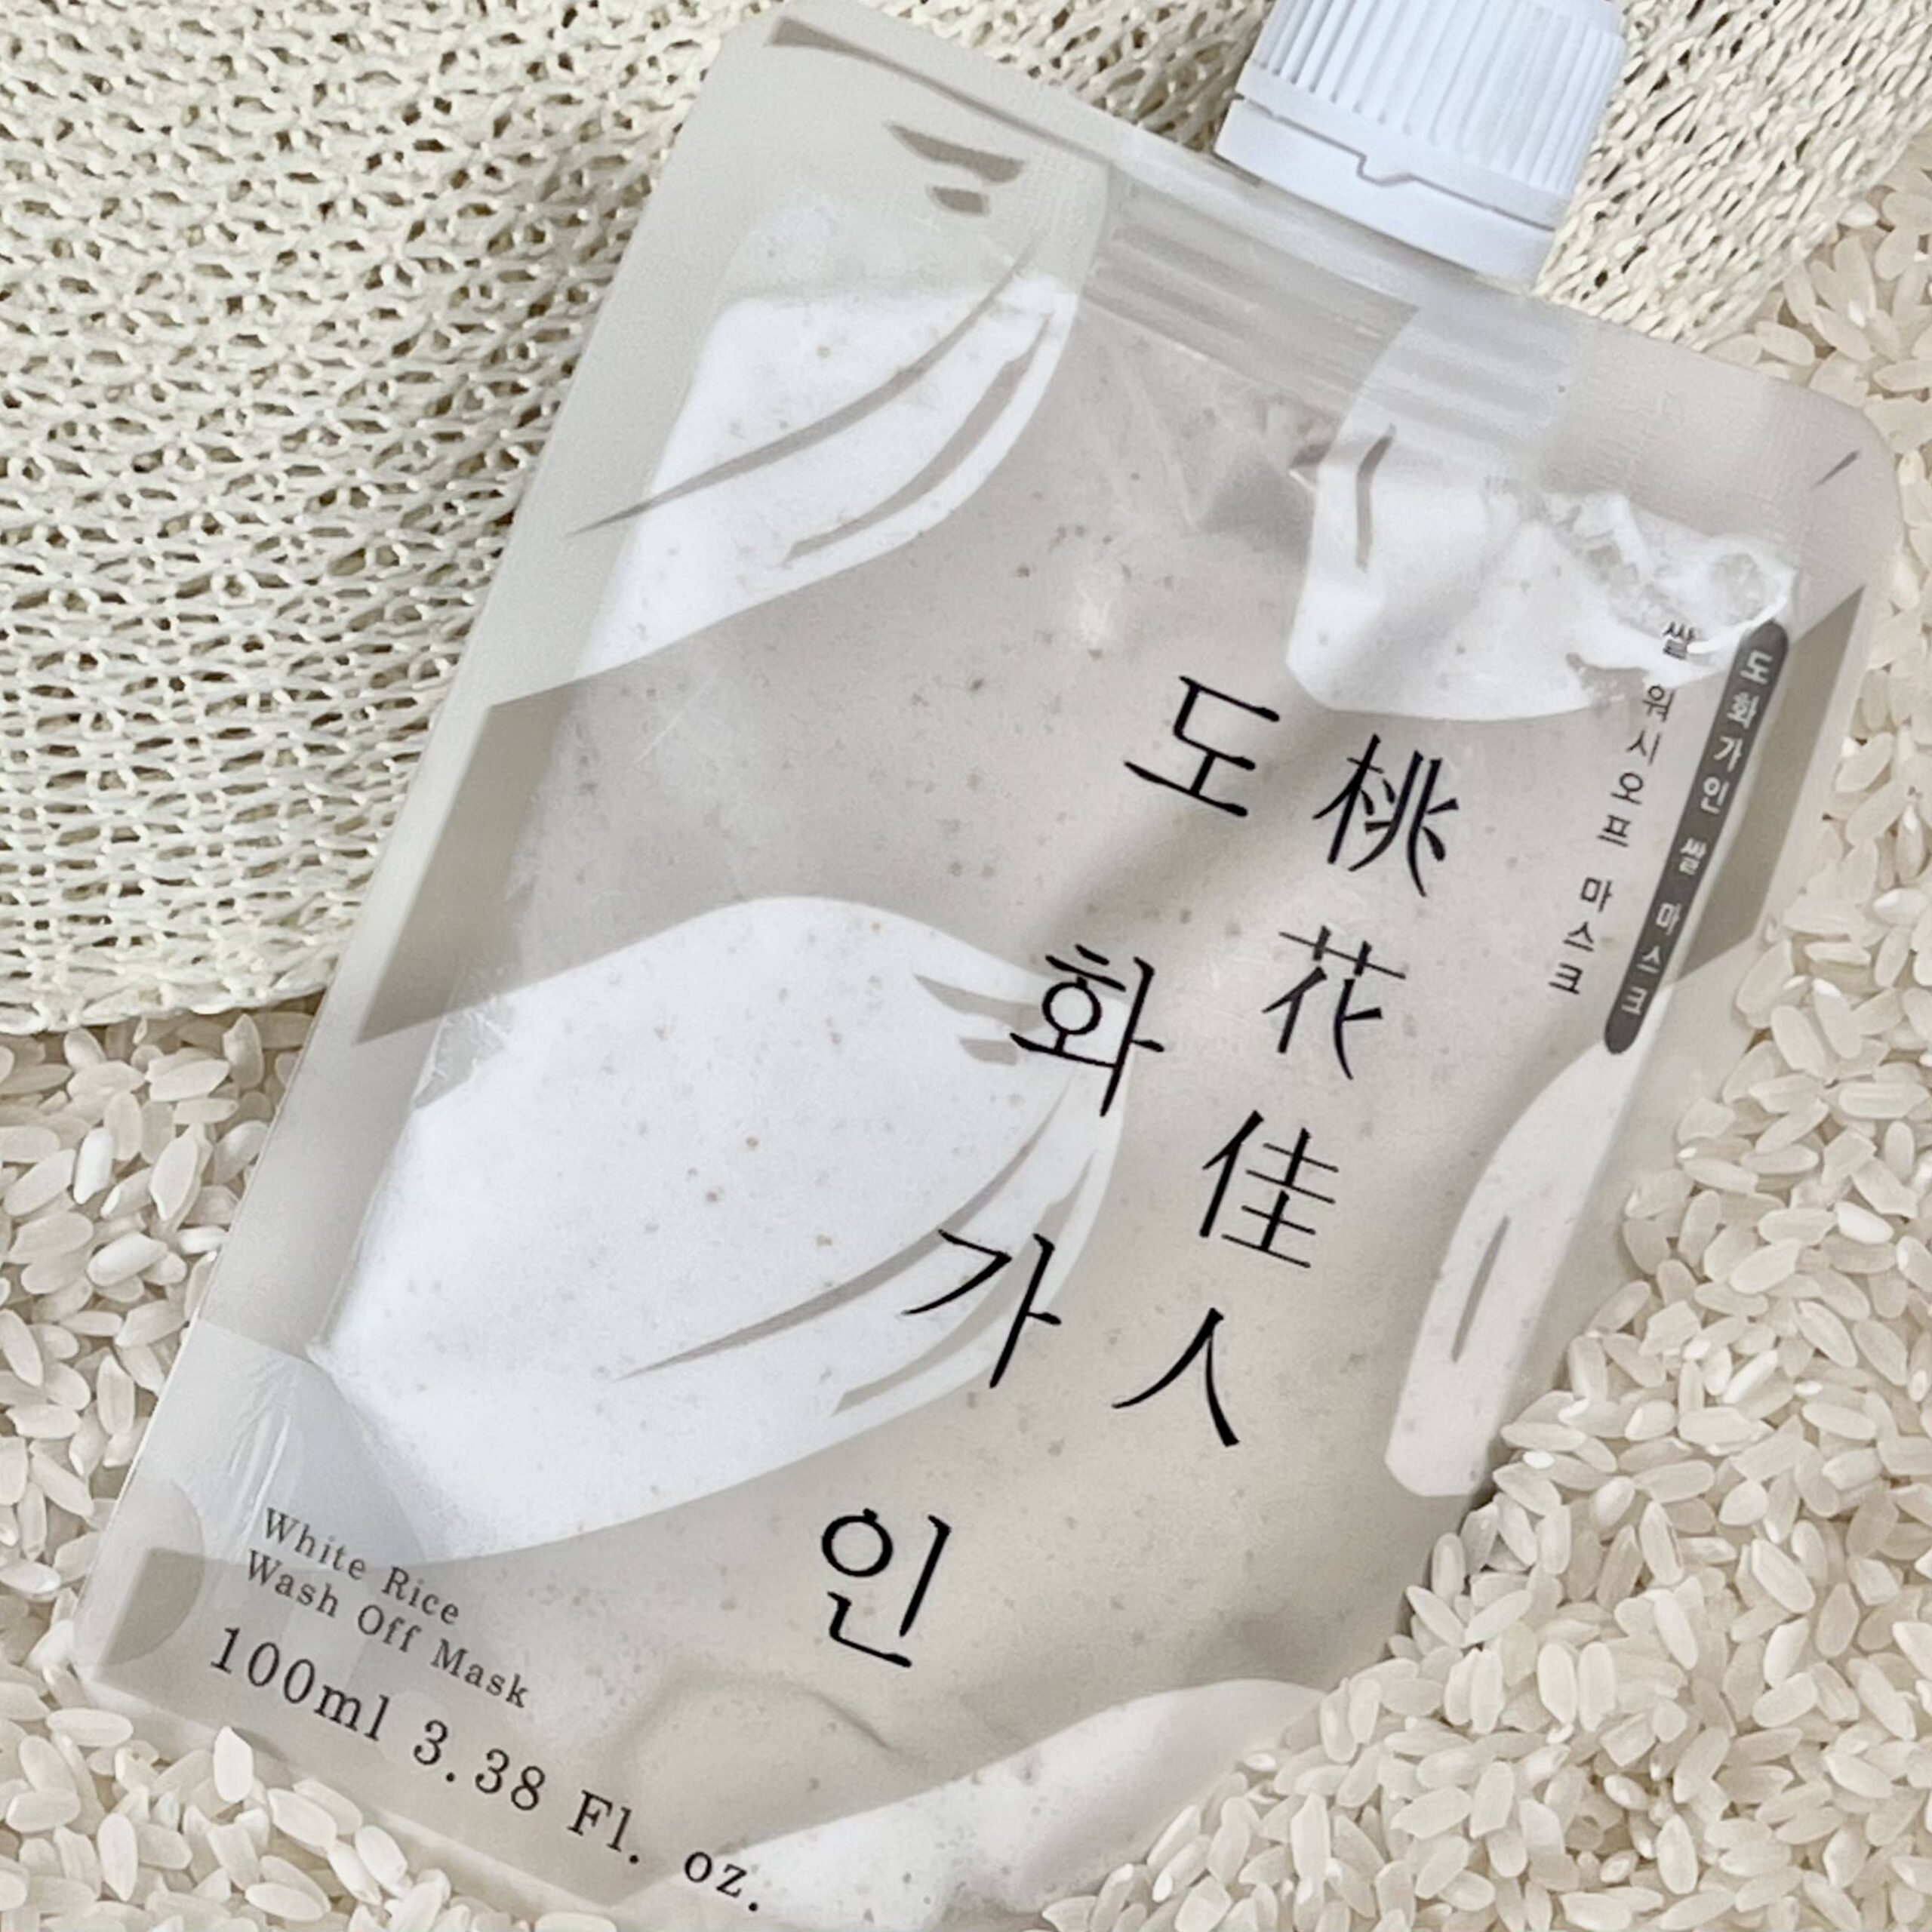 House of Dohwa's Rice Wash Off Facial Mask